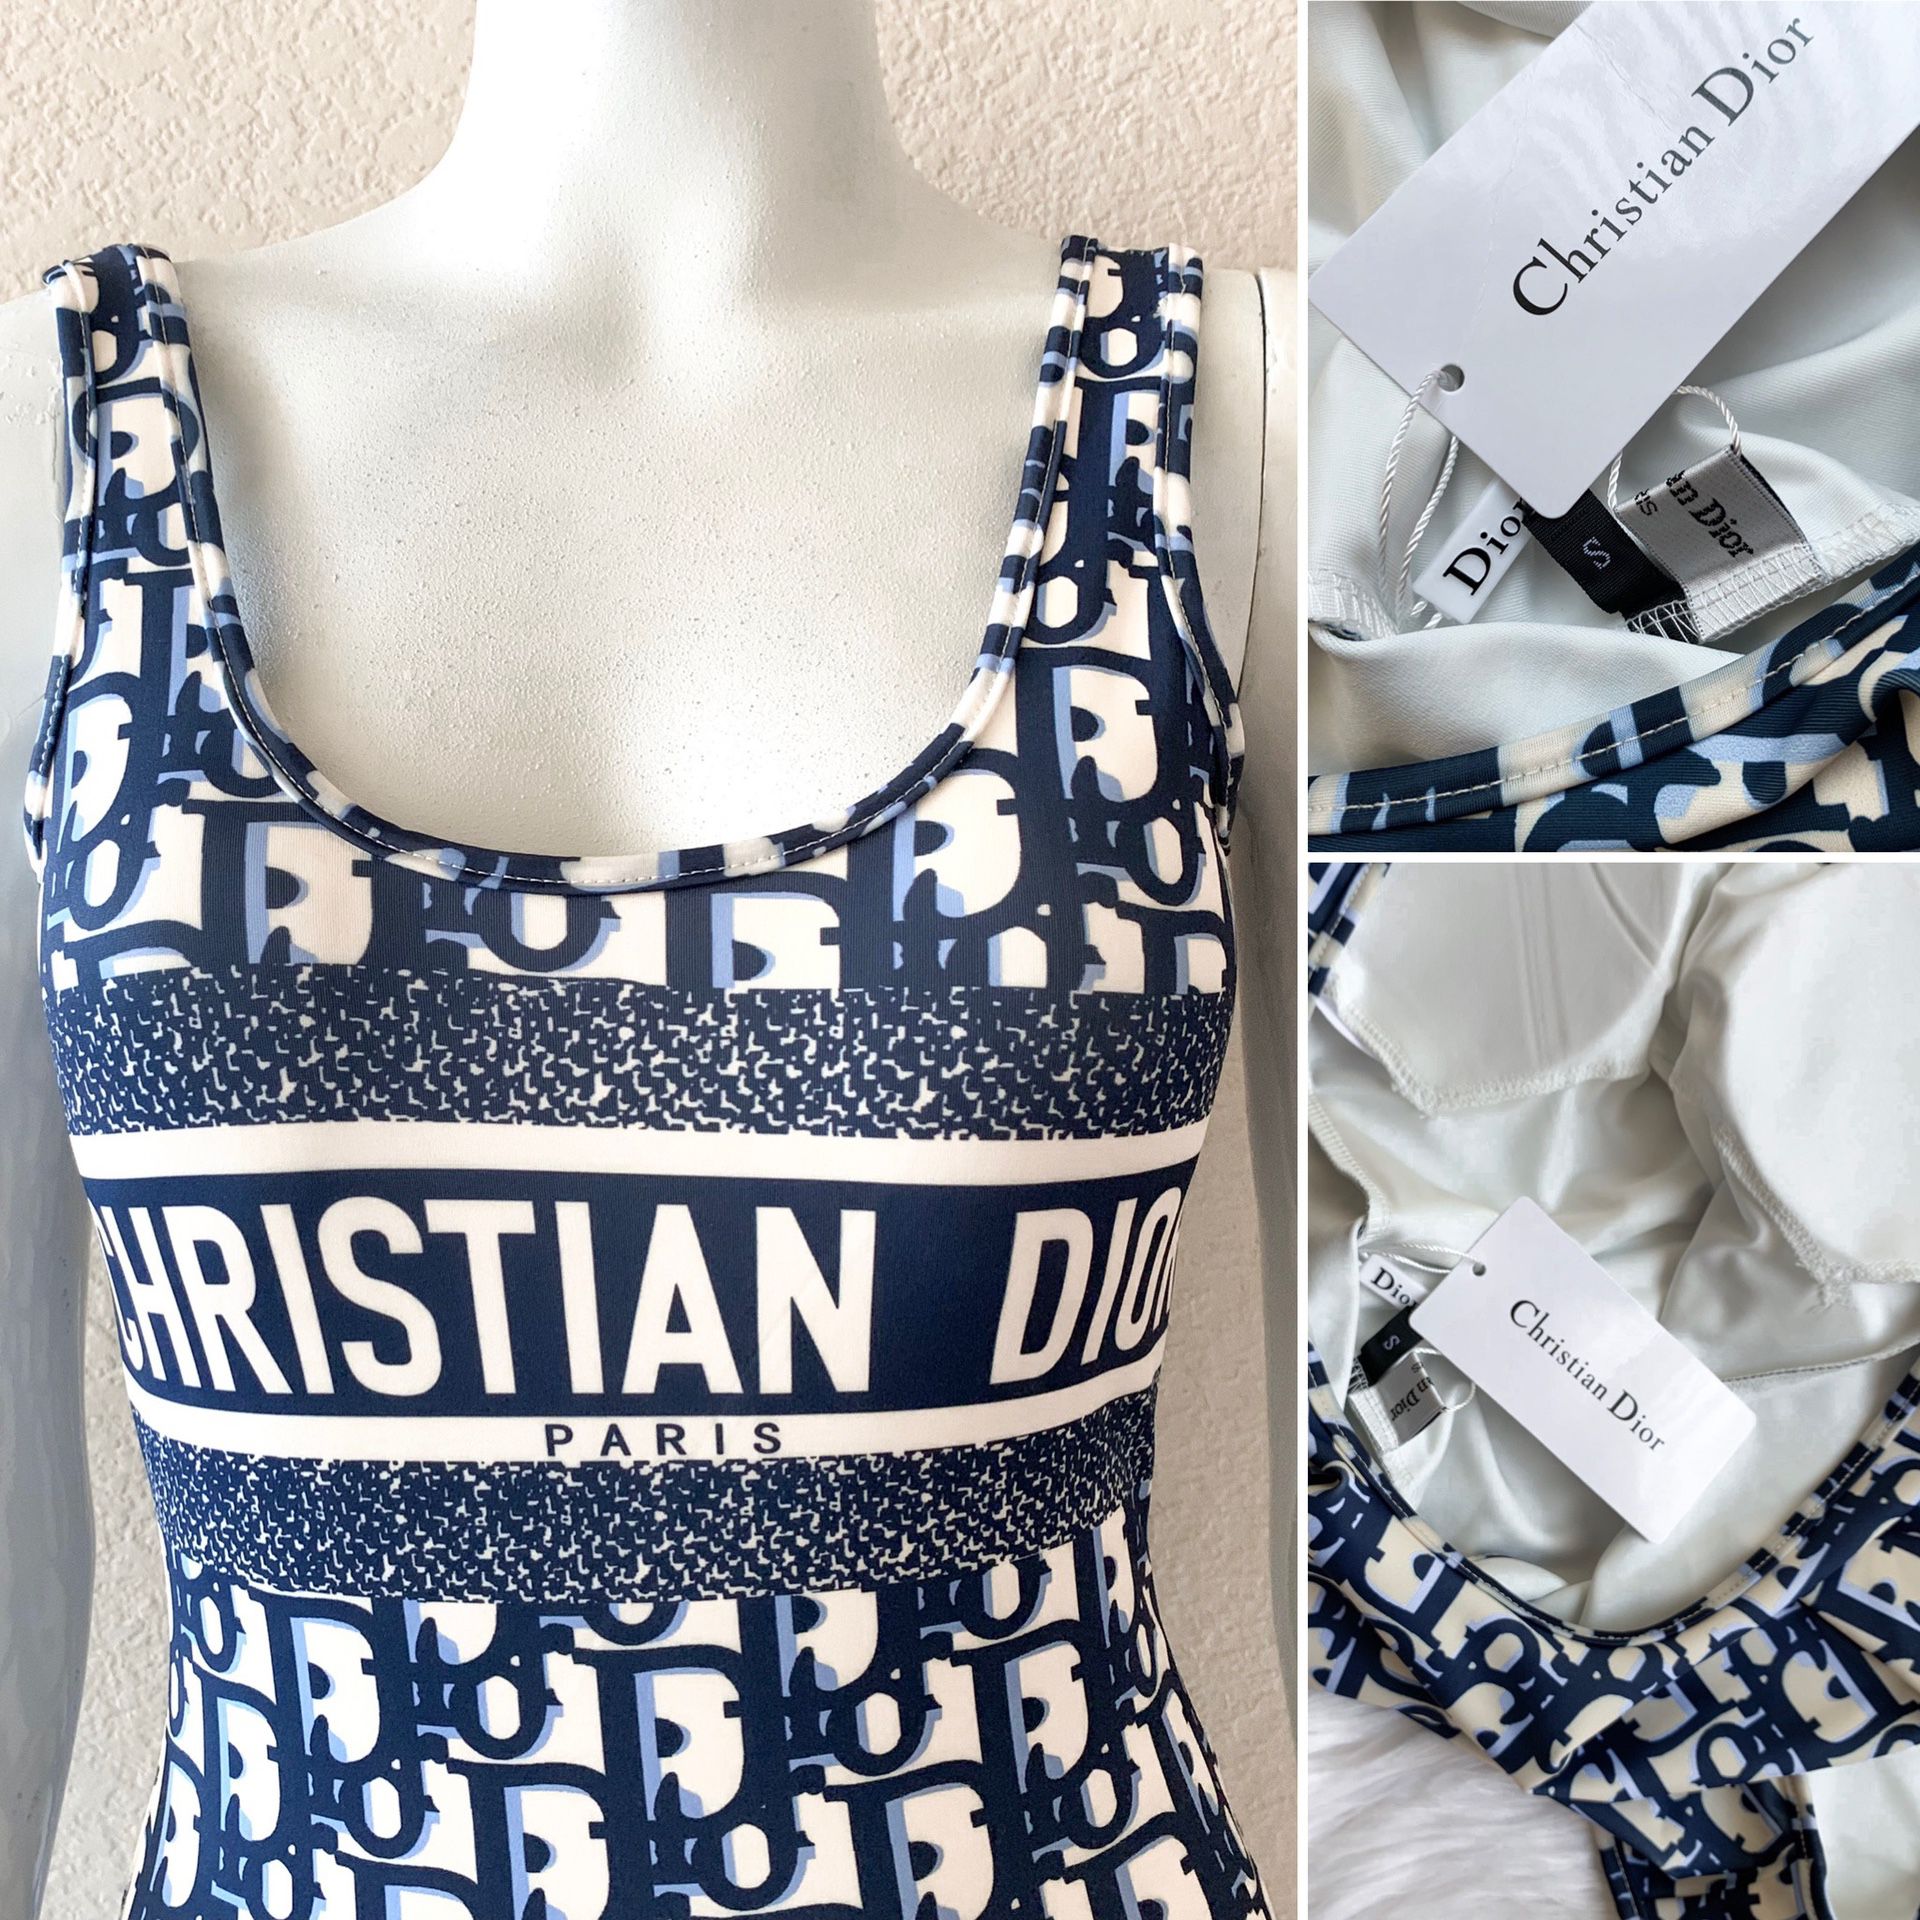 christian dior bathing suit Two piece for Sale in Decatur, GA - OfferUp